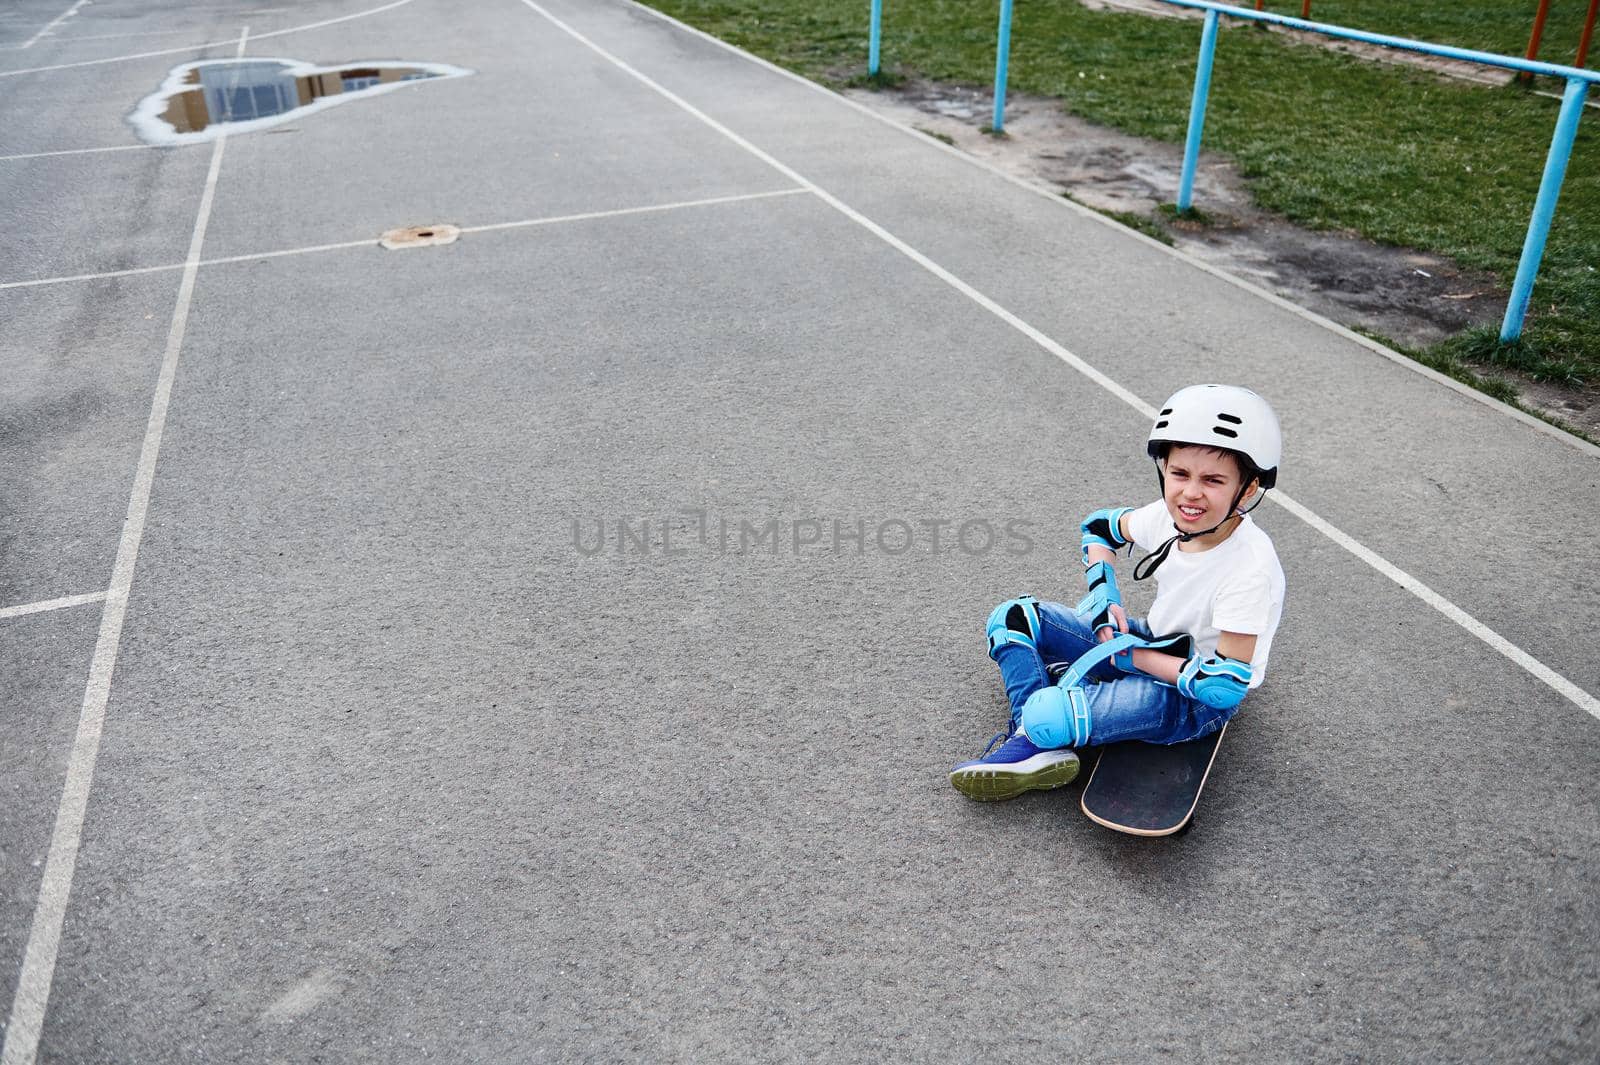 Serious oy in safety helmet sits on skateboard and focuses on putting on protective gear for skateboarder by artgf